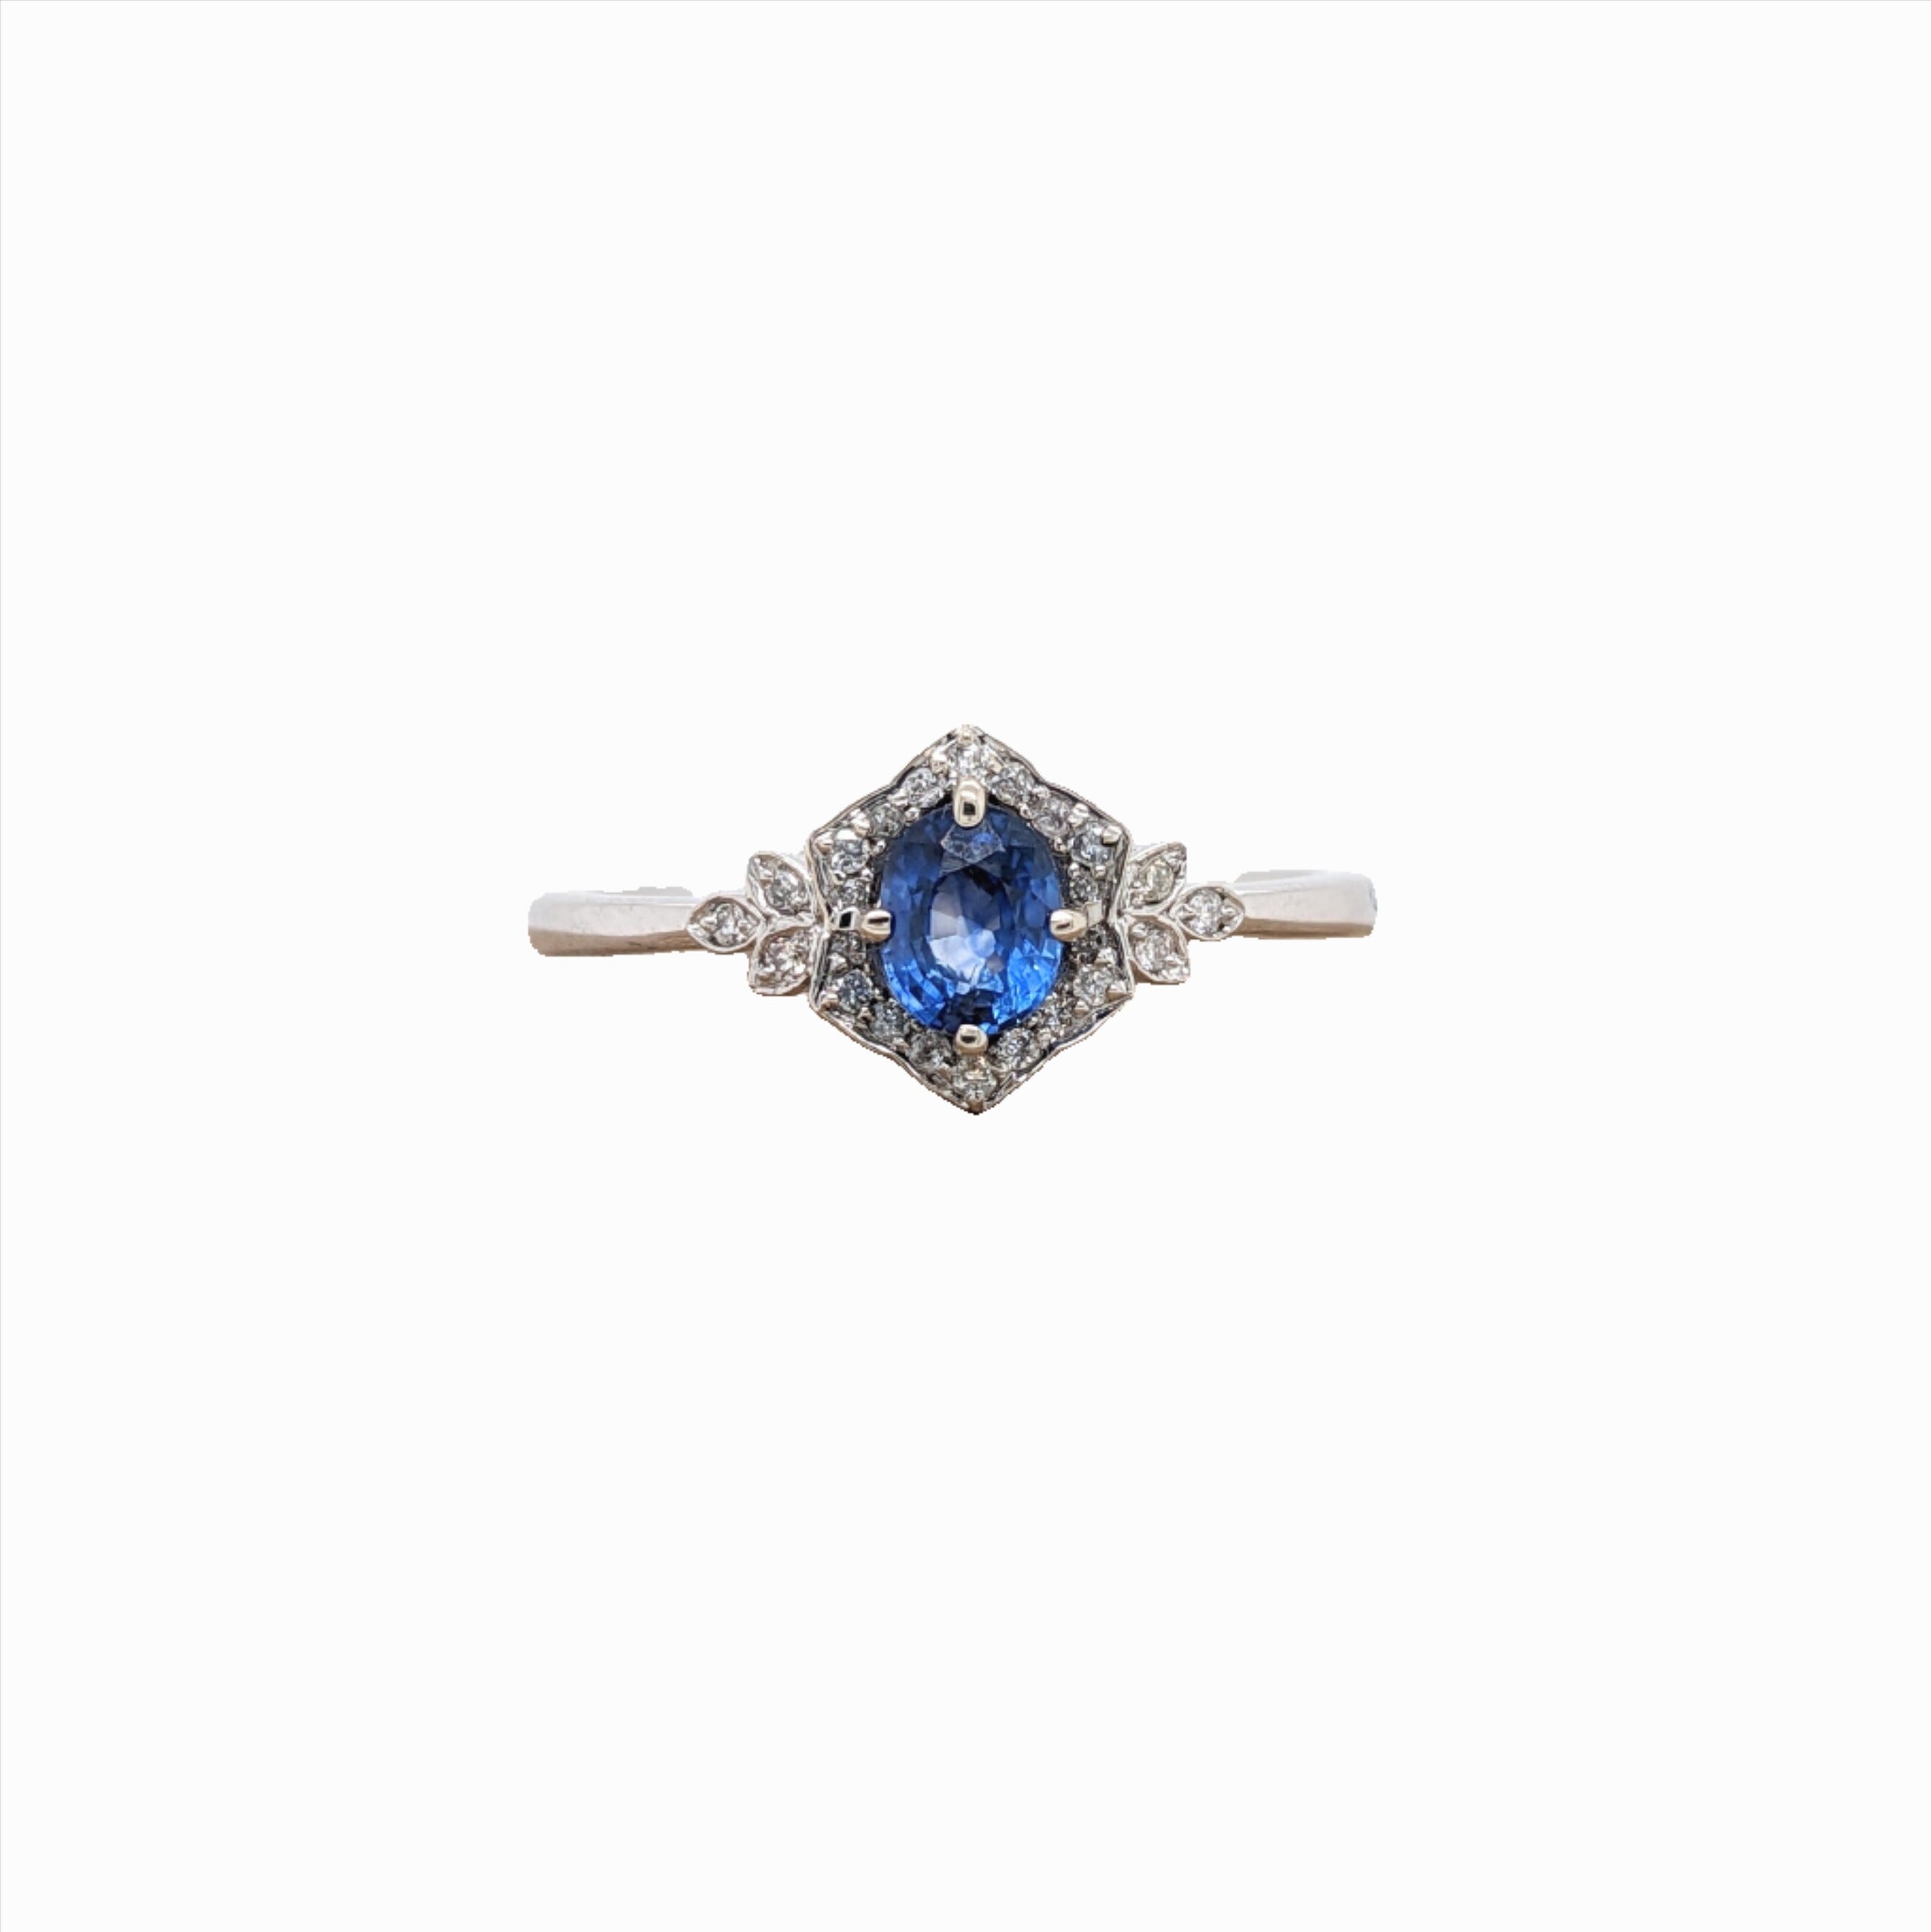 Vintage Style Oval Sapphire Ring w Diamond Accents in Solid 14k White Gold | Oval 5x4mm | Milgrain Detail | Compass Prong | September Stone